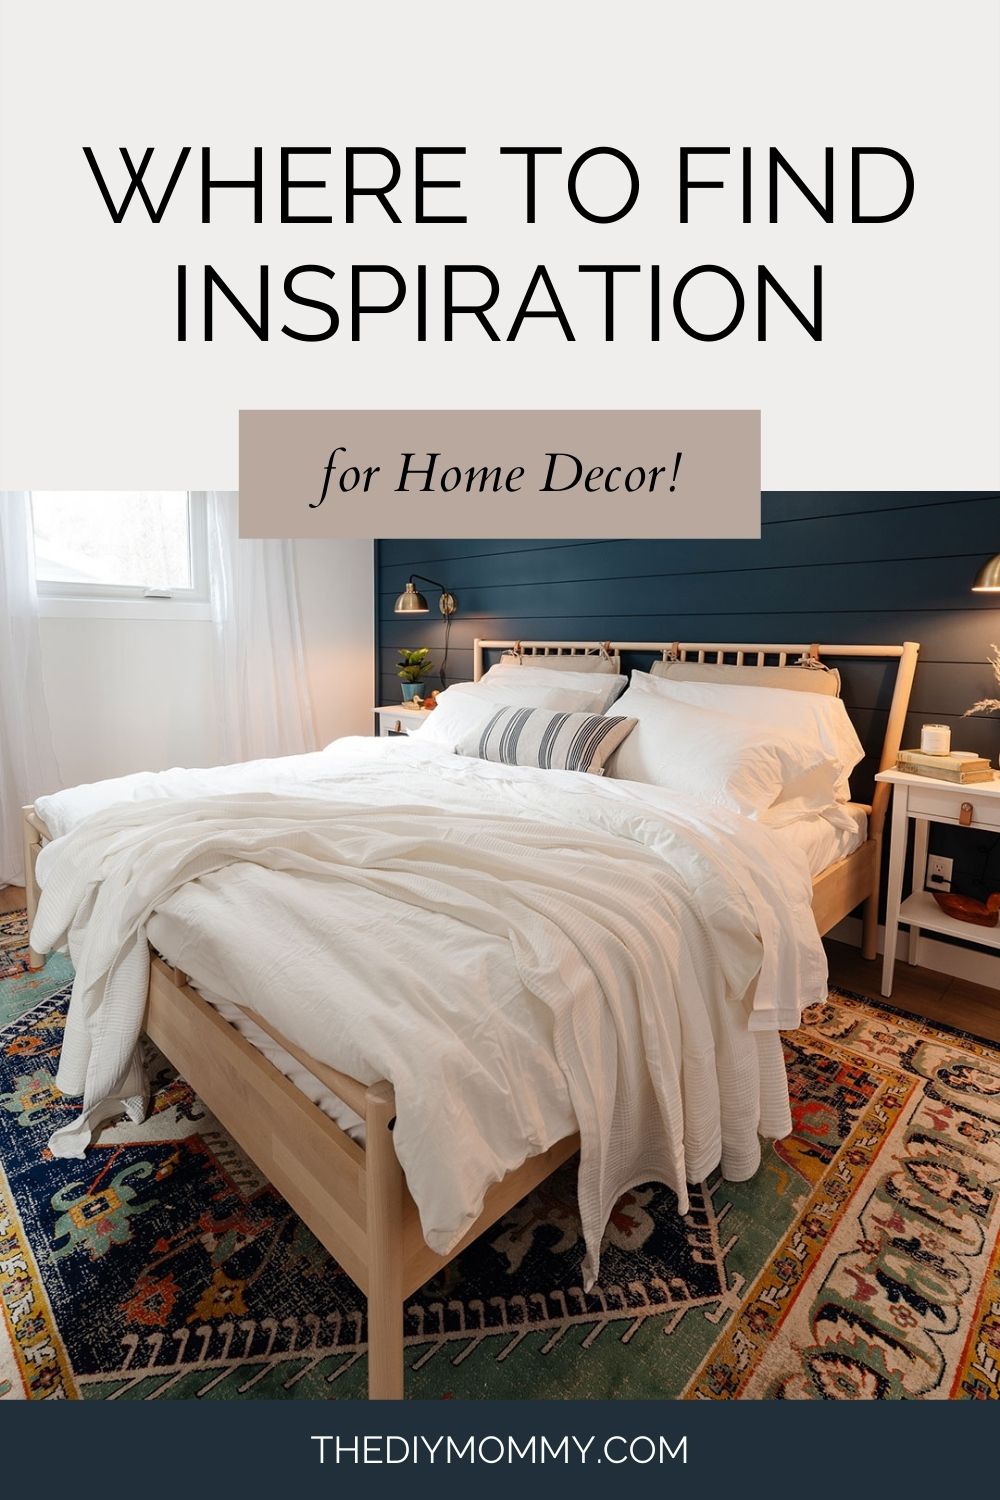 Where to find inspiration for your DIY decorating project